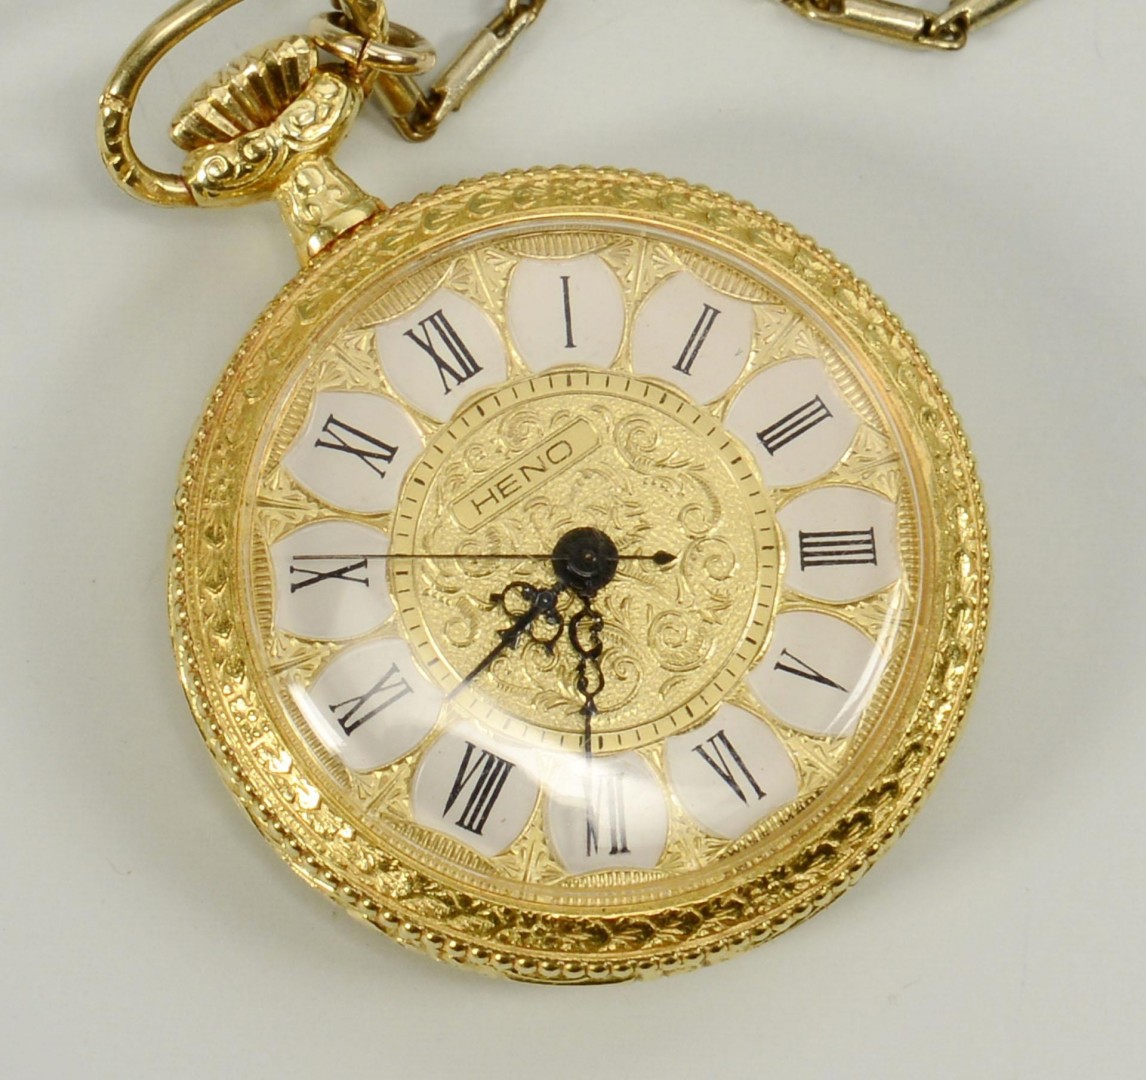 Lot 712: Group of 4 pocket watches